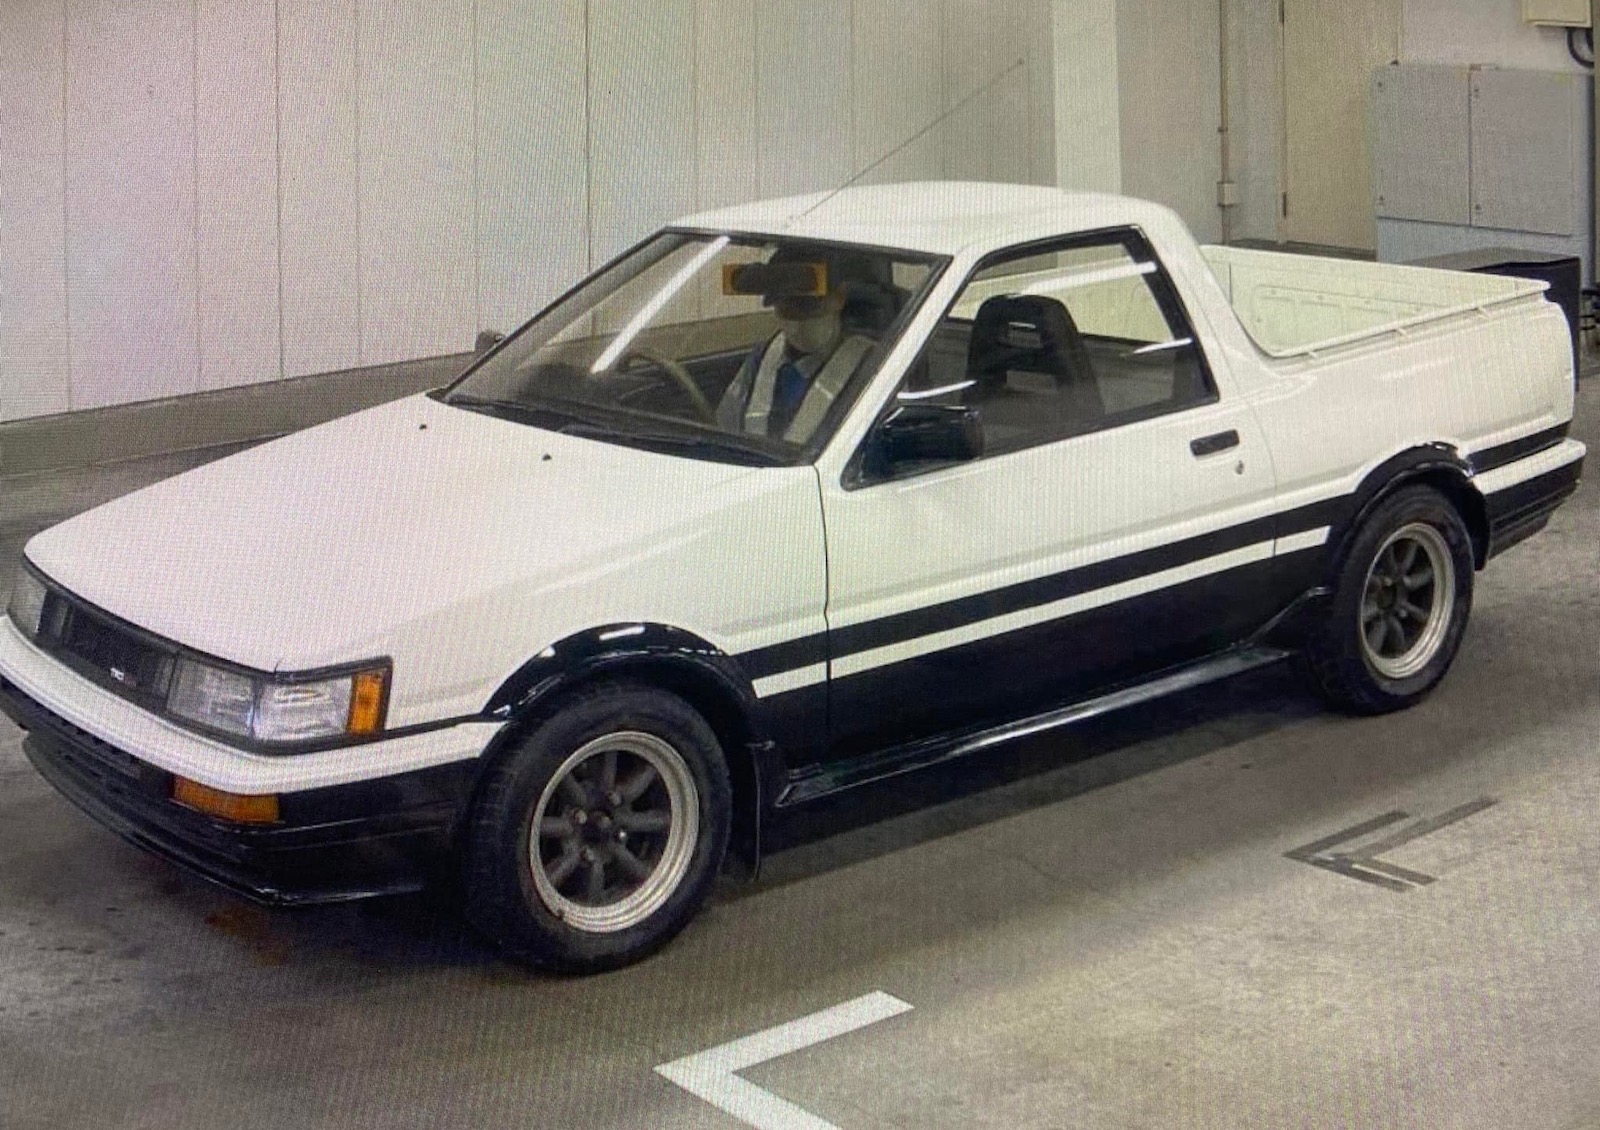 For Sale: 1986 Toyota Levin AE86 ute / pickup truck